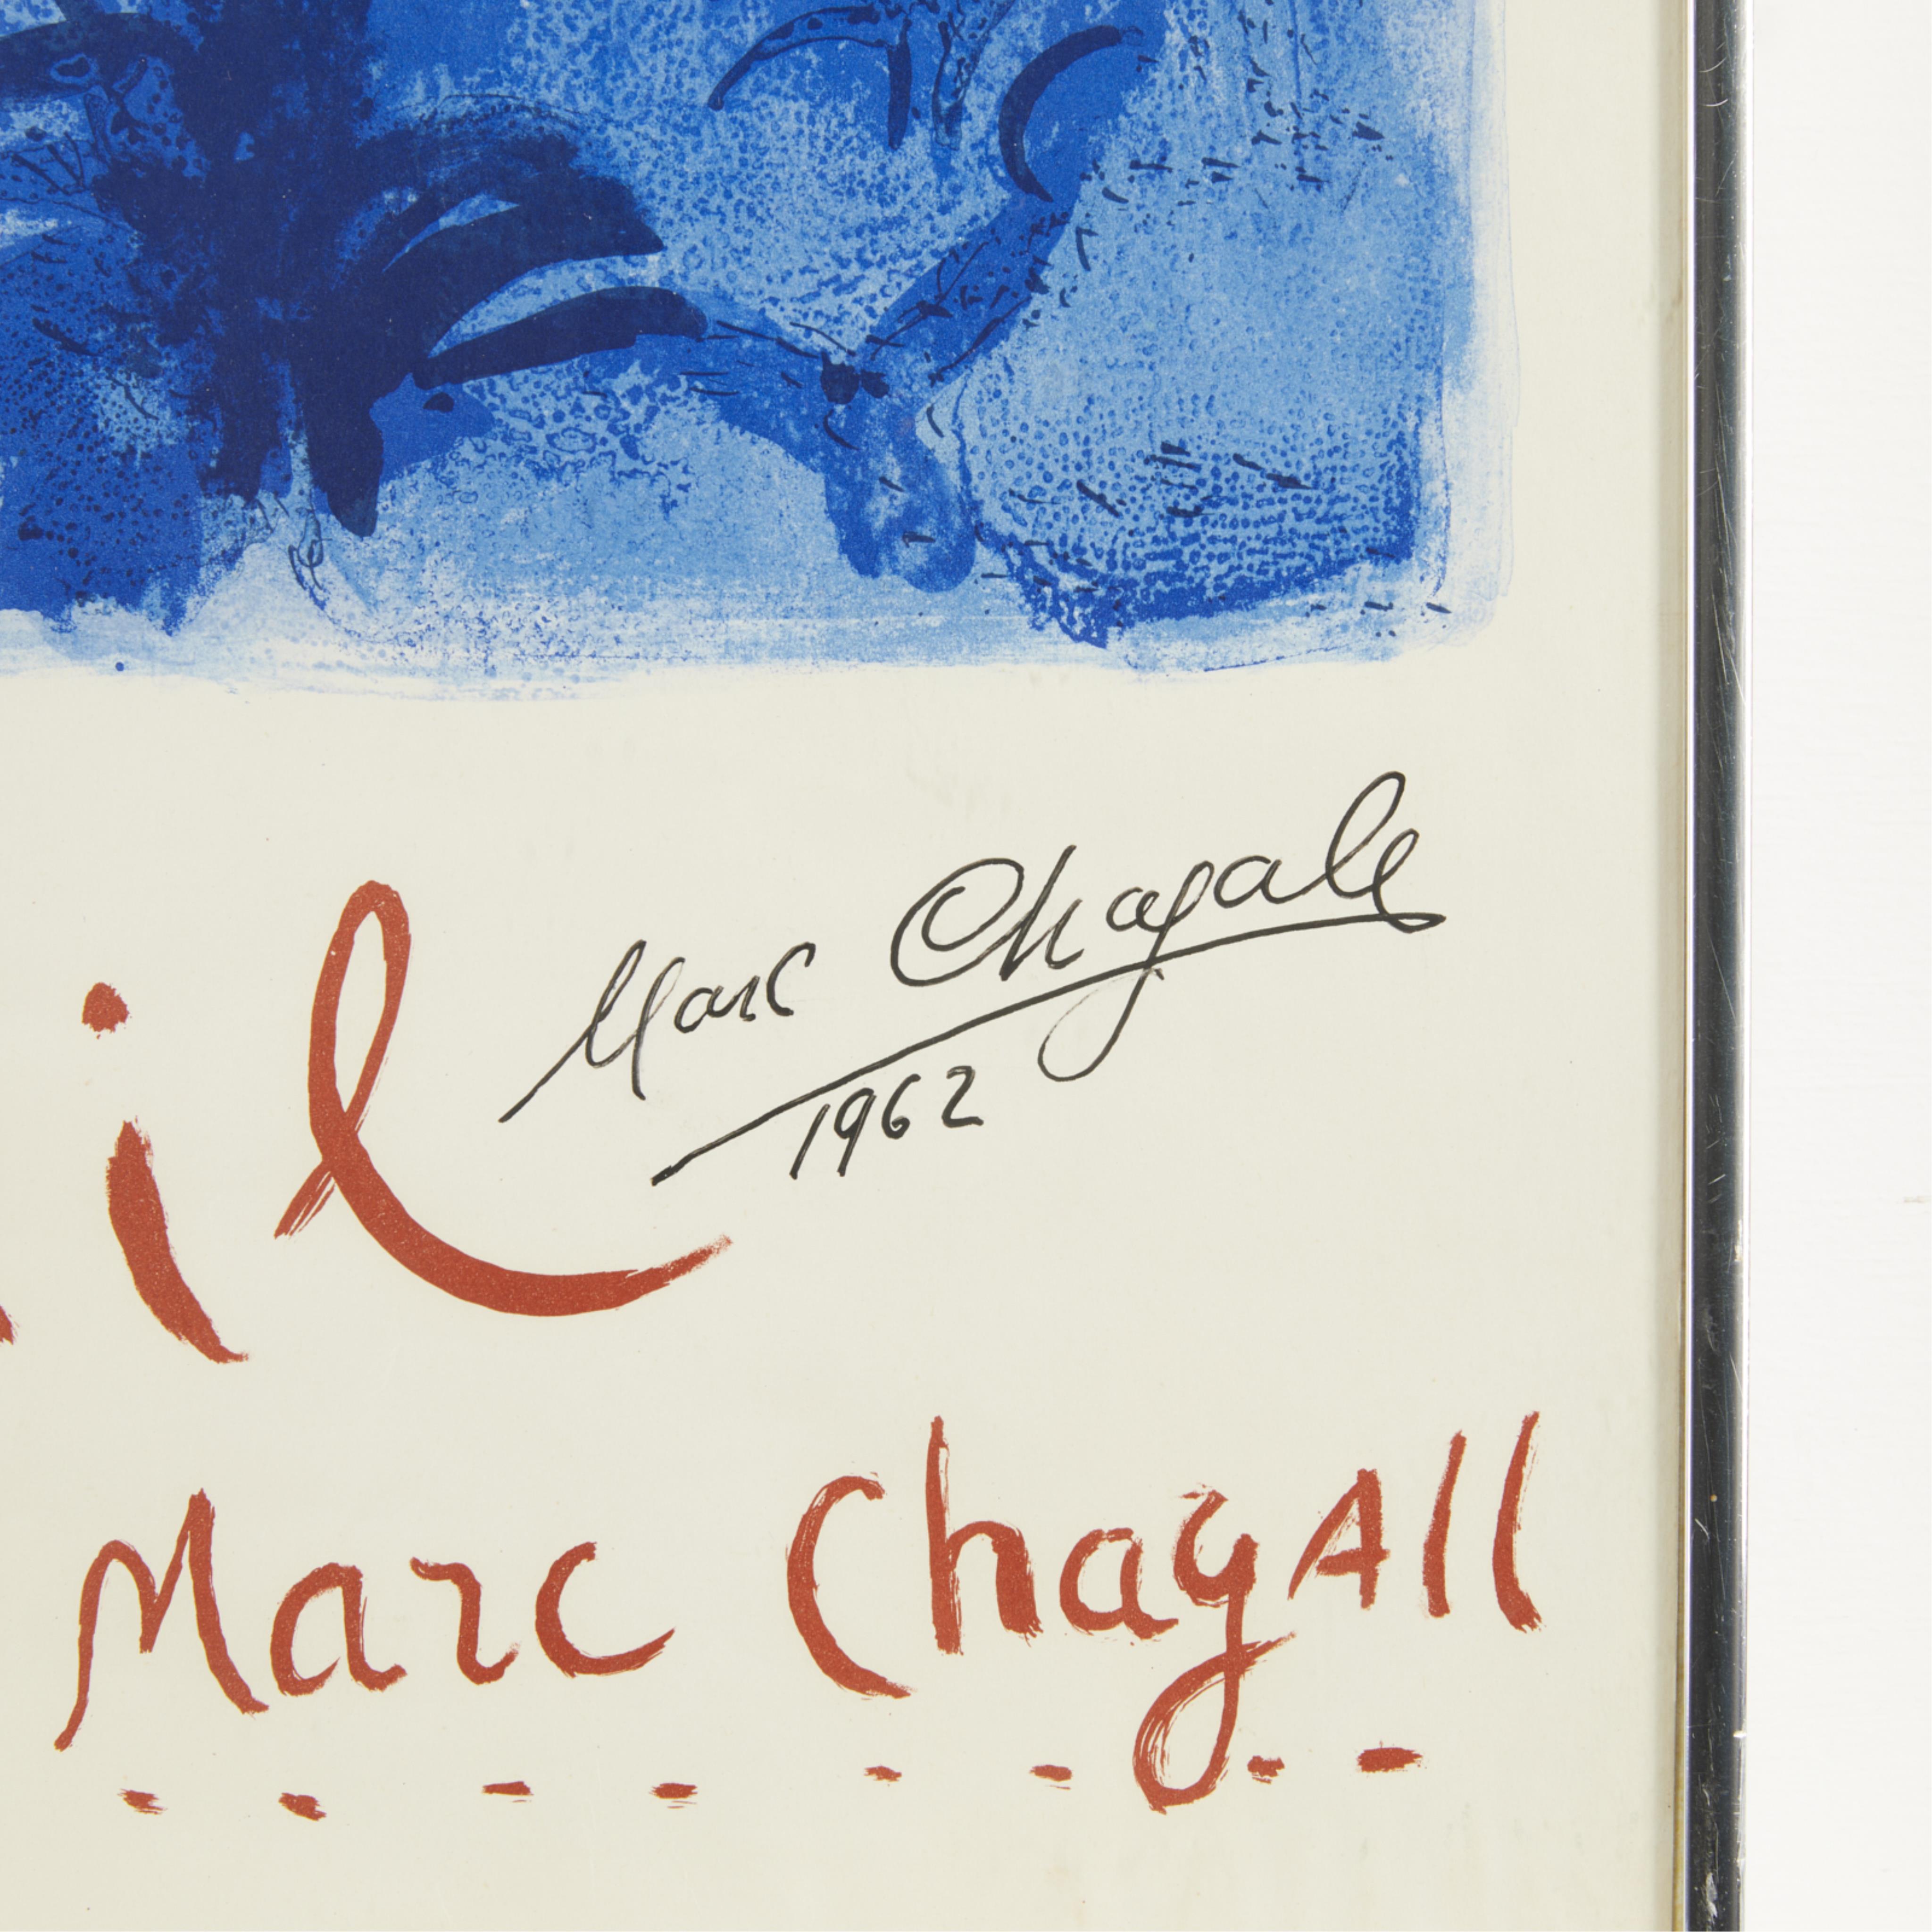 Marc Chagall "Bay of Angels" Signed Poster 1962 - Image 2 of 7